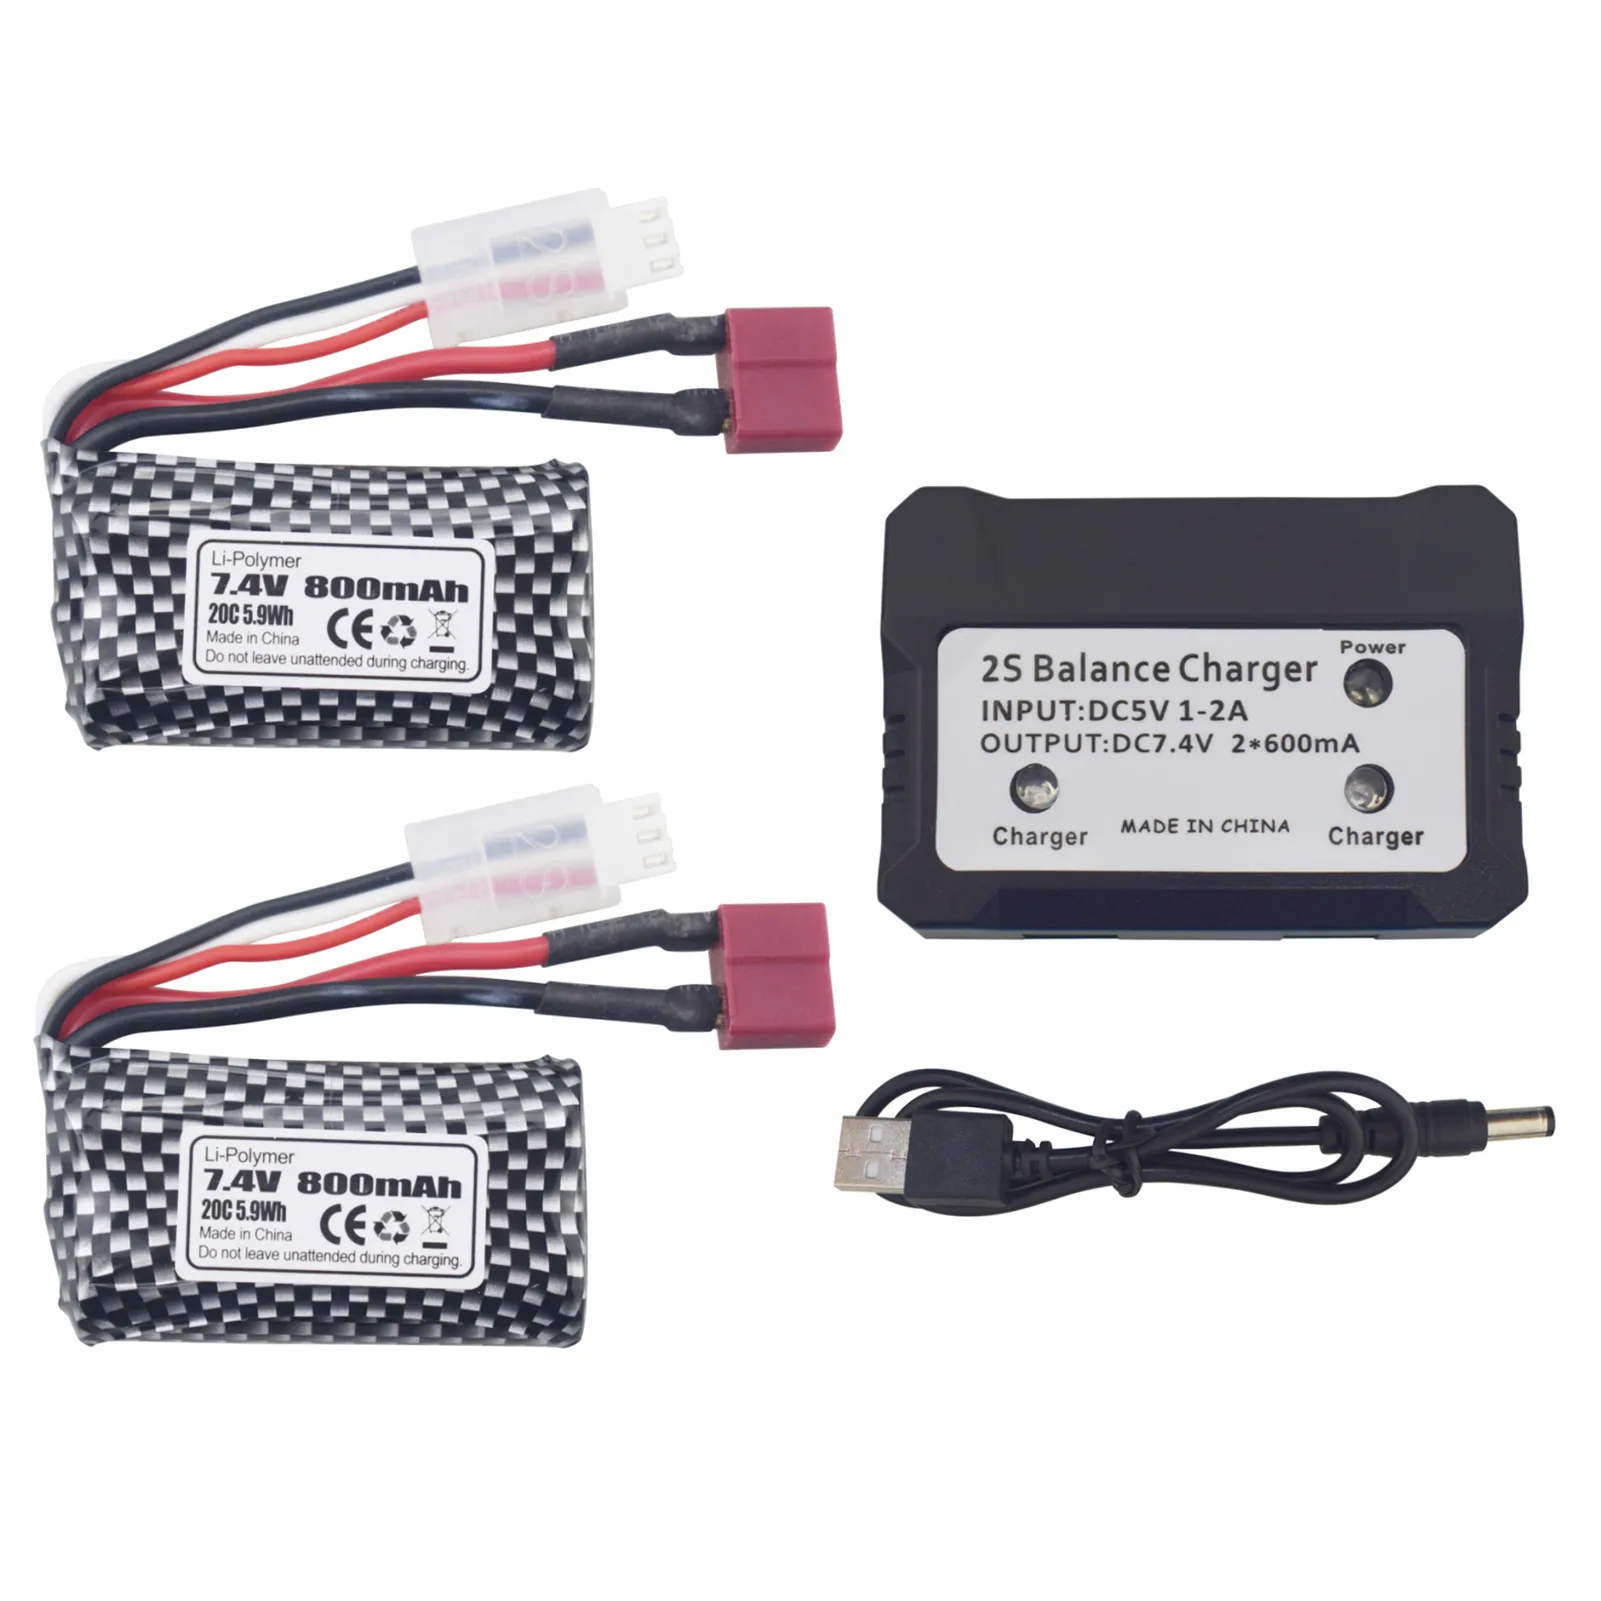 

2PCS 7.4V 800mAh T-Plug Lithium Battery + 2-In-1 Charger For YC100 HM161 HM162 HM166 HM201 9145 RC 4WD High-Speed Off-Road Car